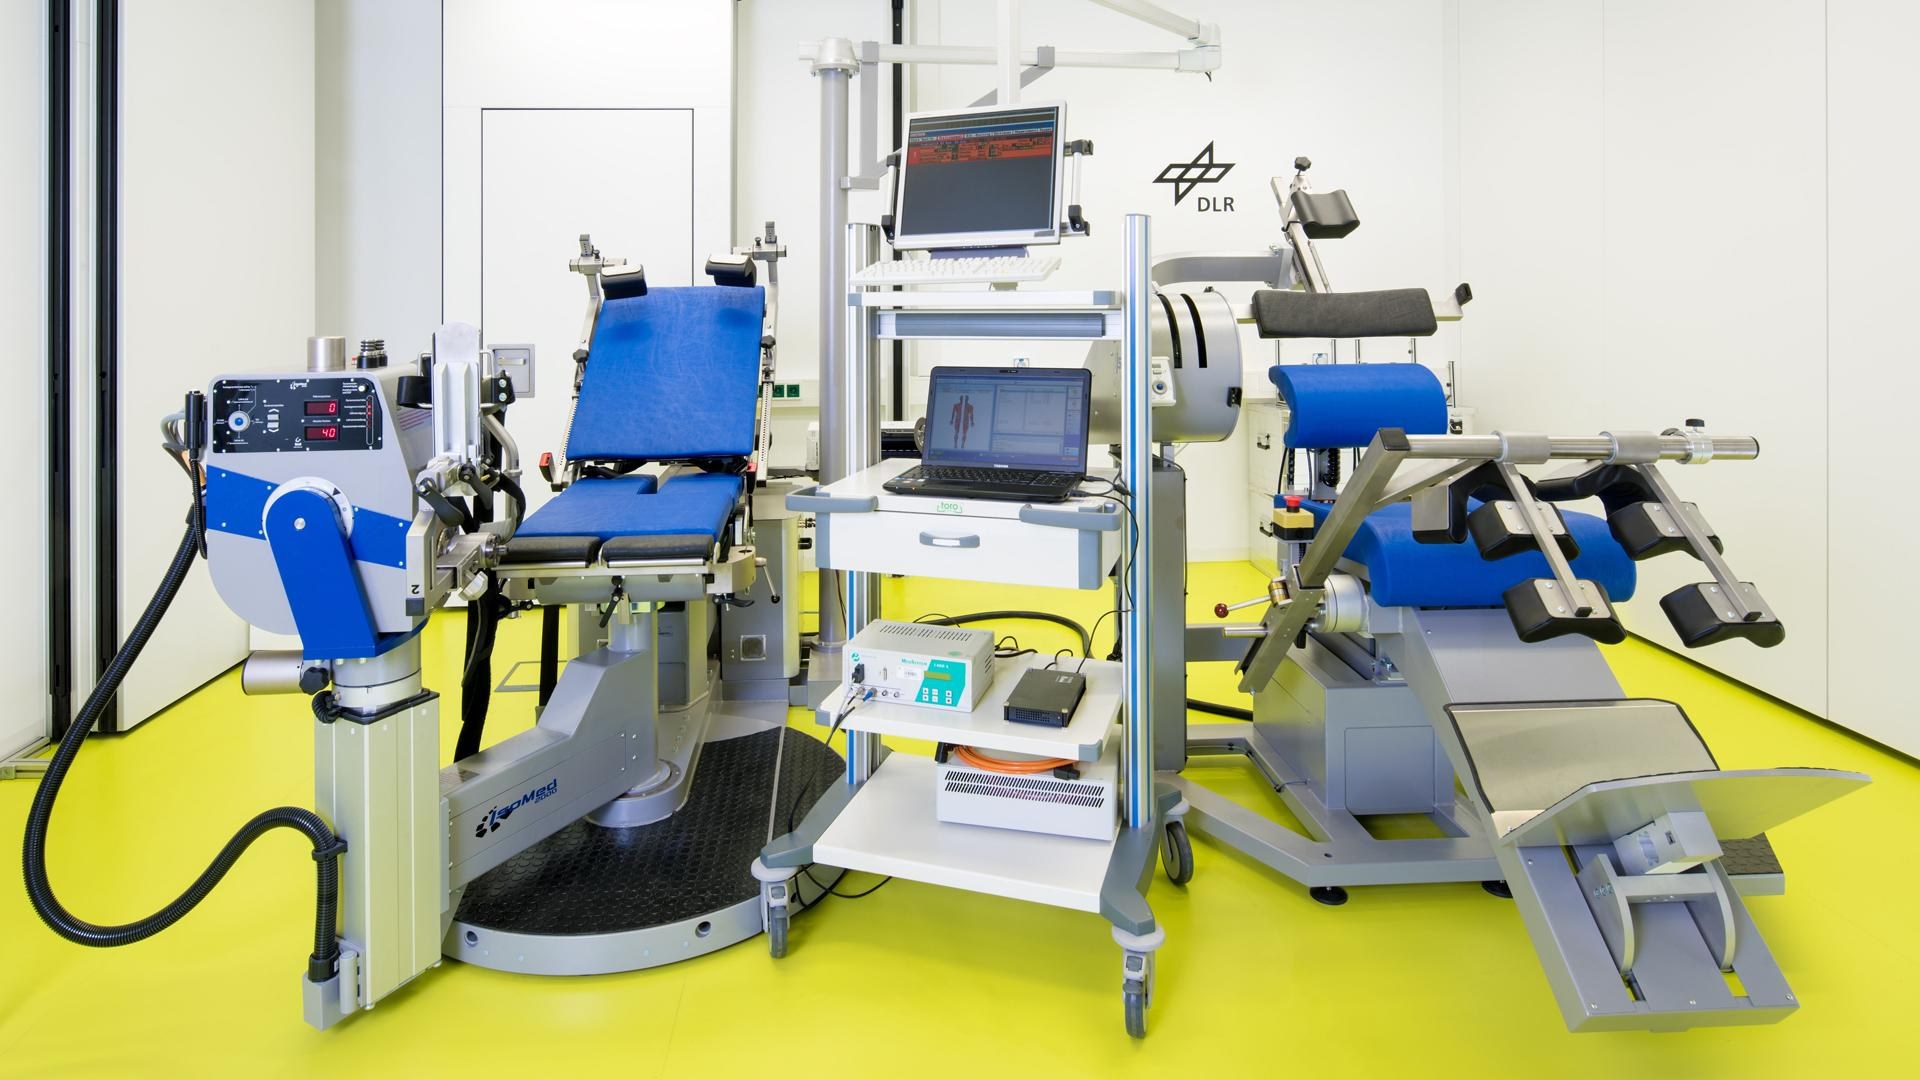 Equipment in the physiology laboratory